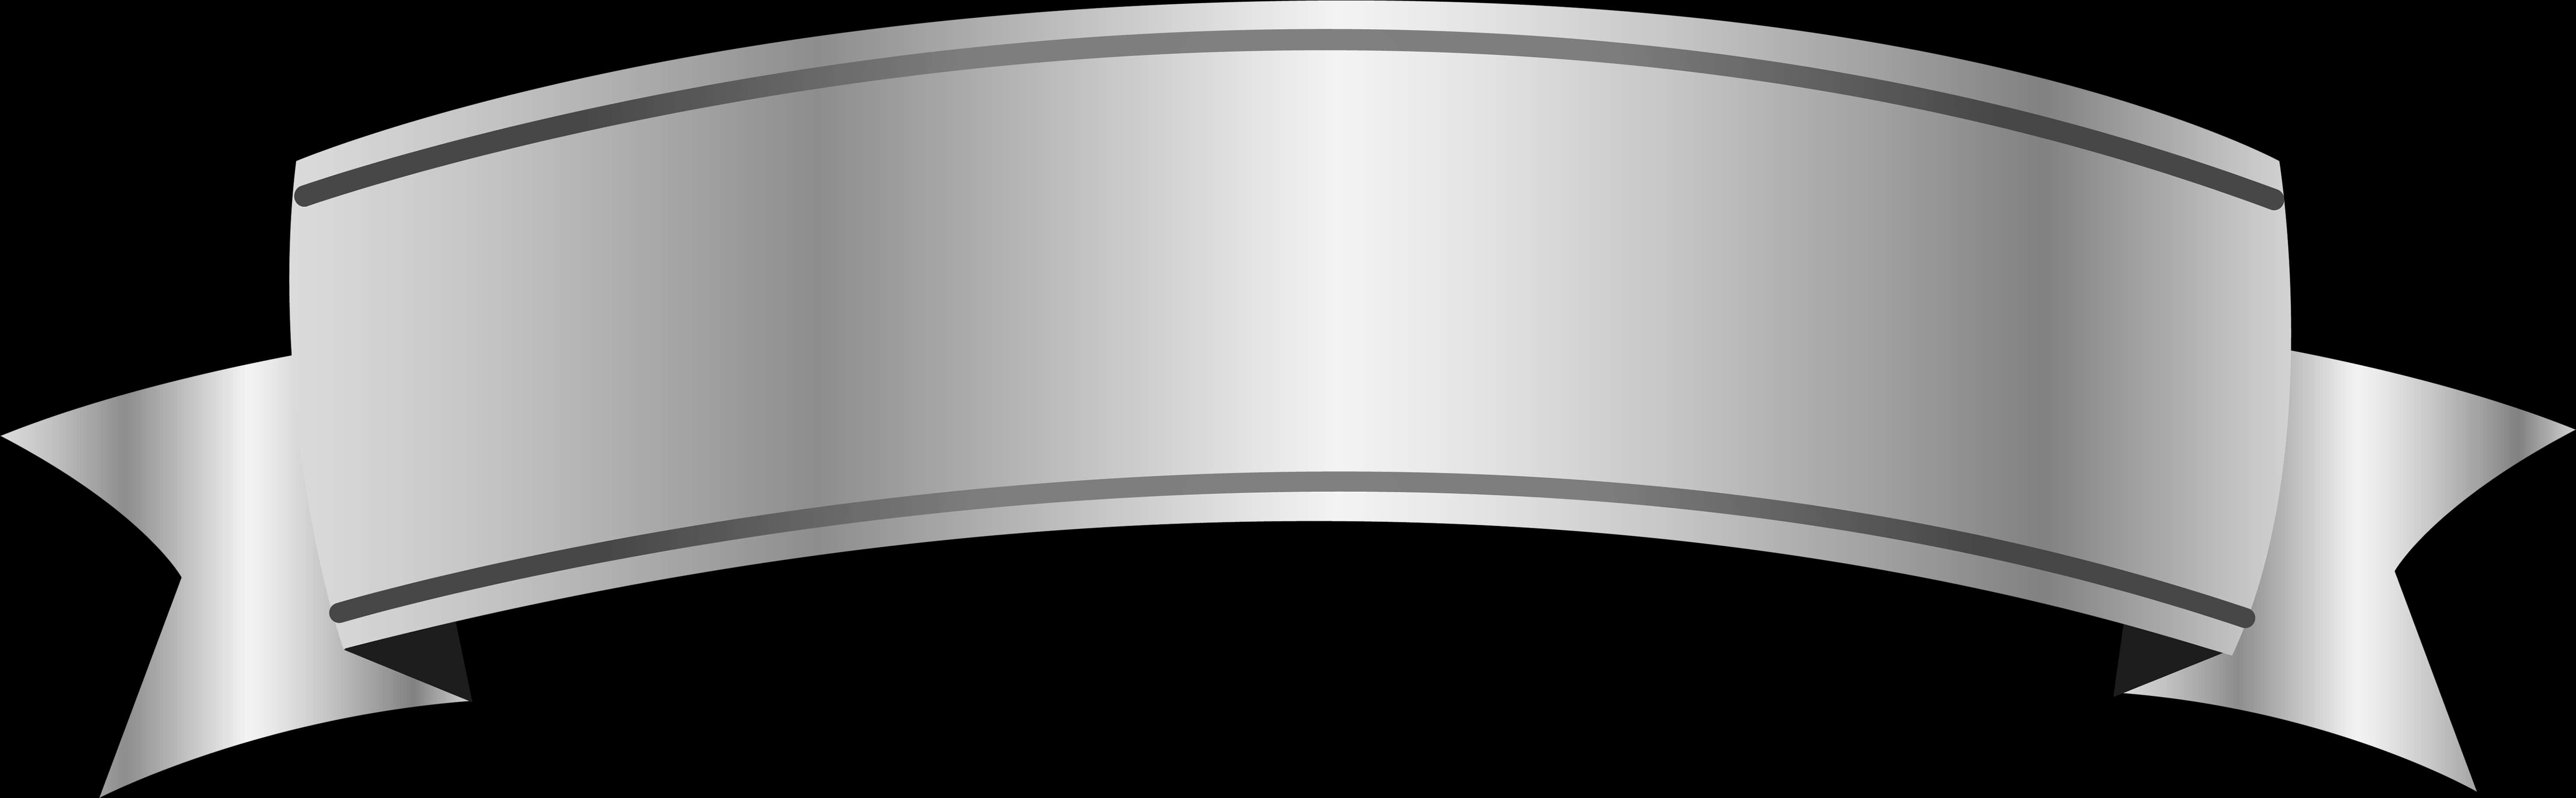 Silver Banner Ribbon Graphic PNG image